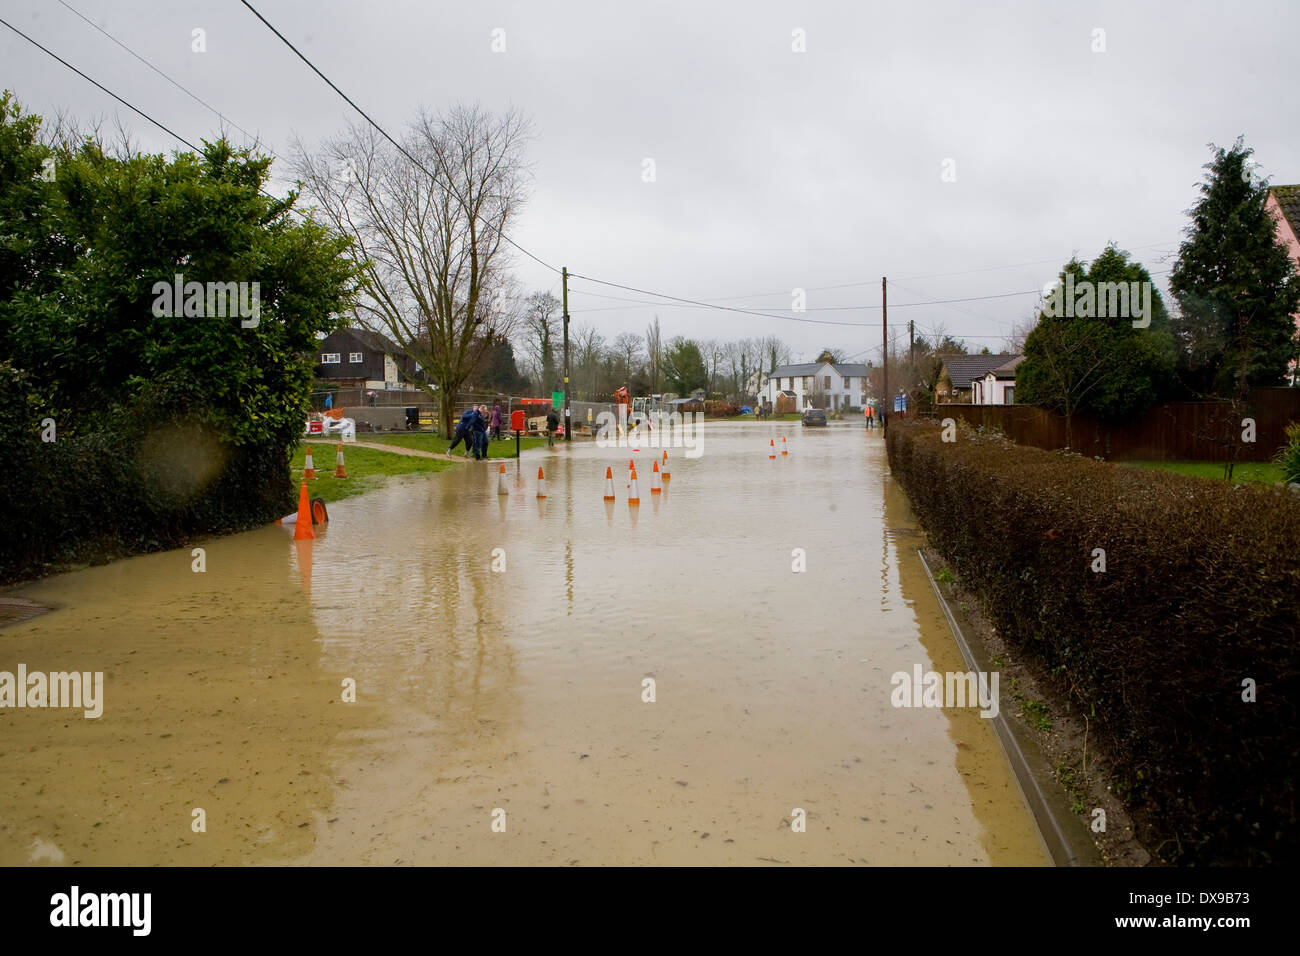 Flooded village of Steeple Bumpstead in Essex today after heavy overnight rain Pic George Impey Stock Photo